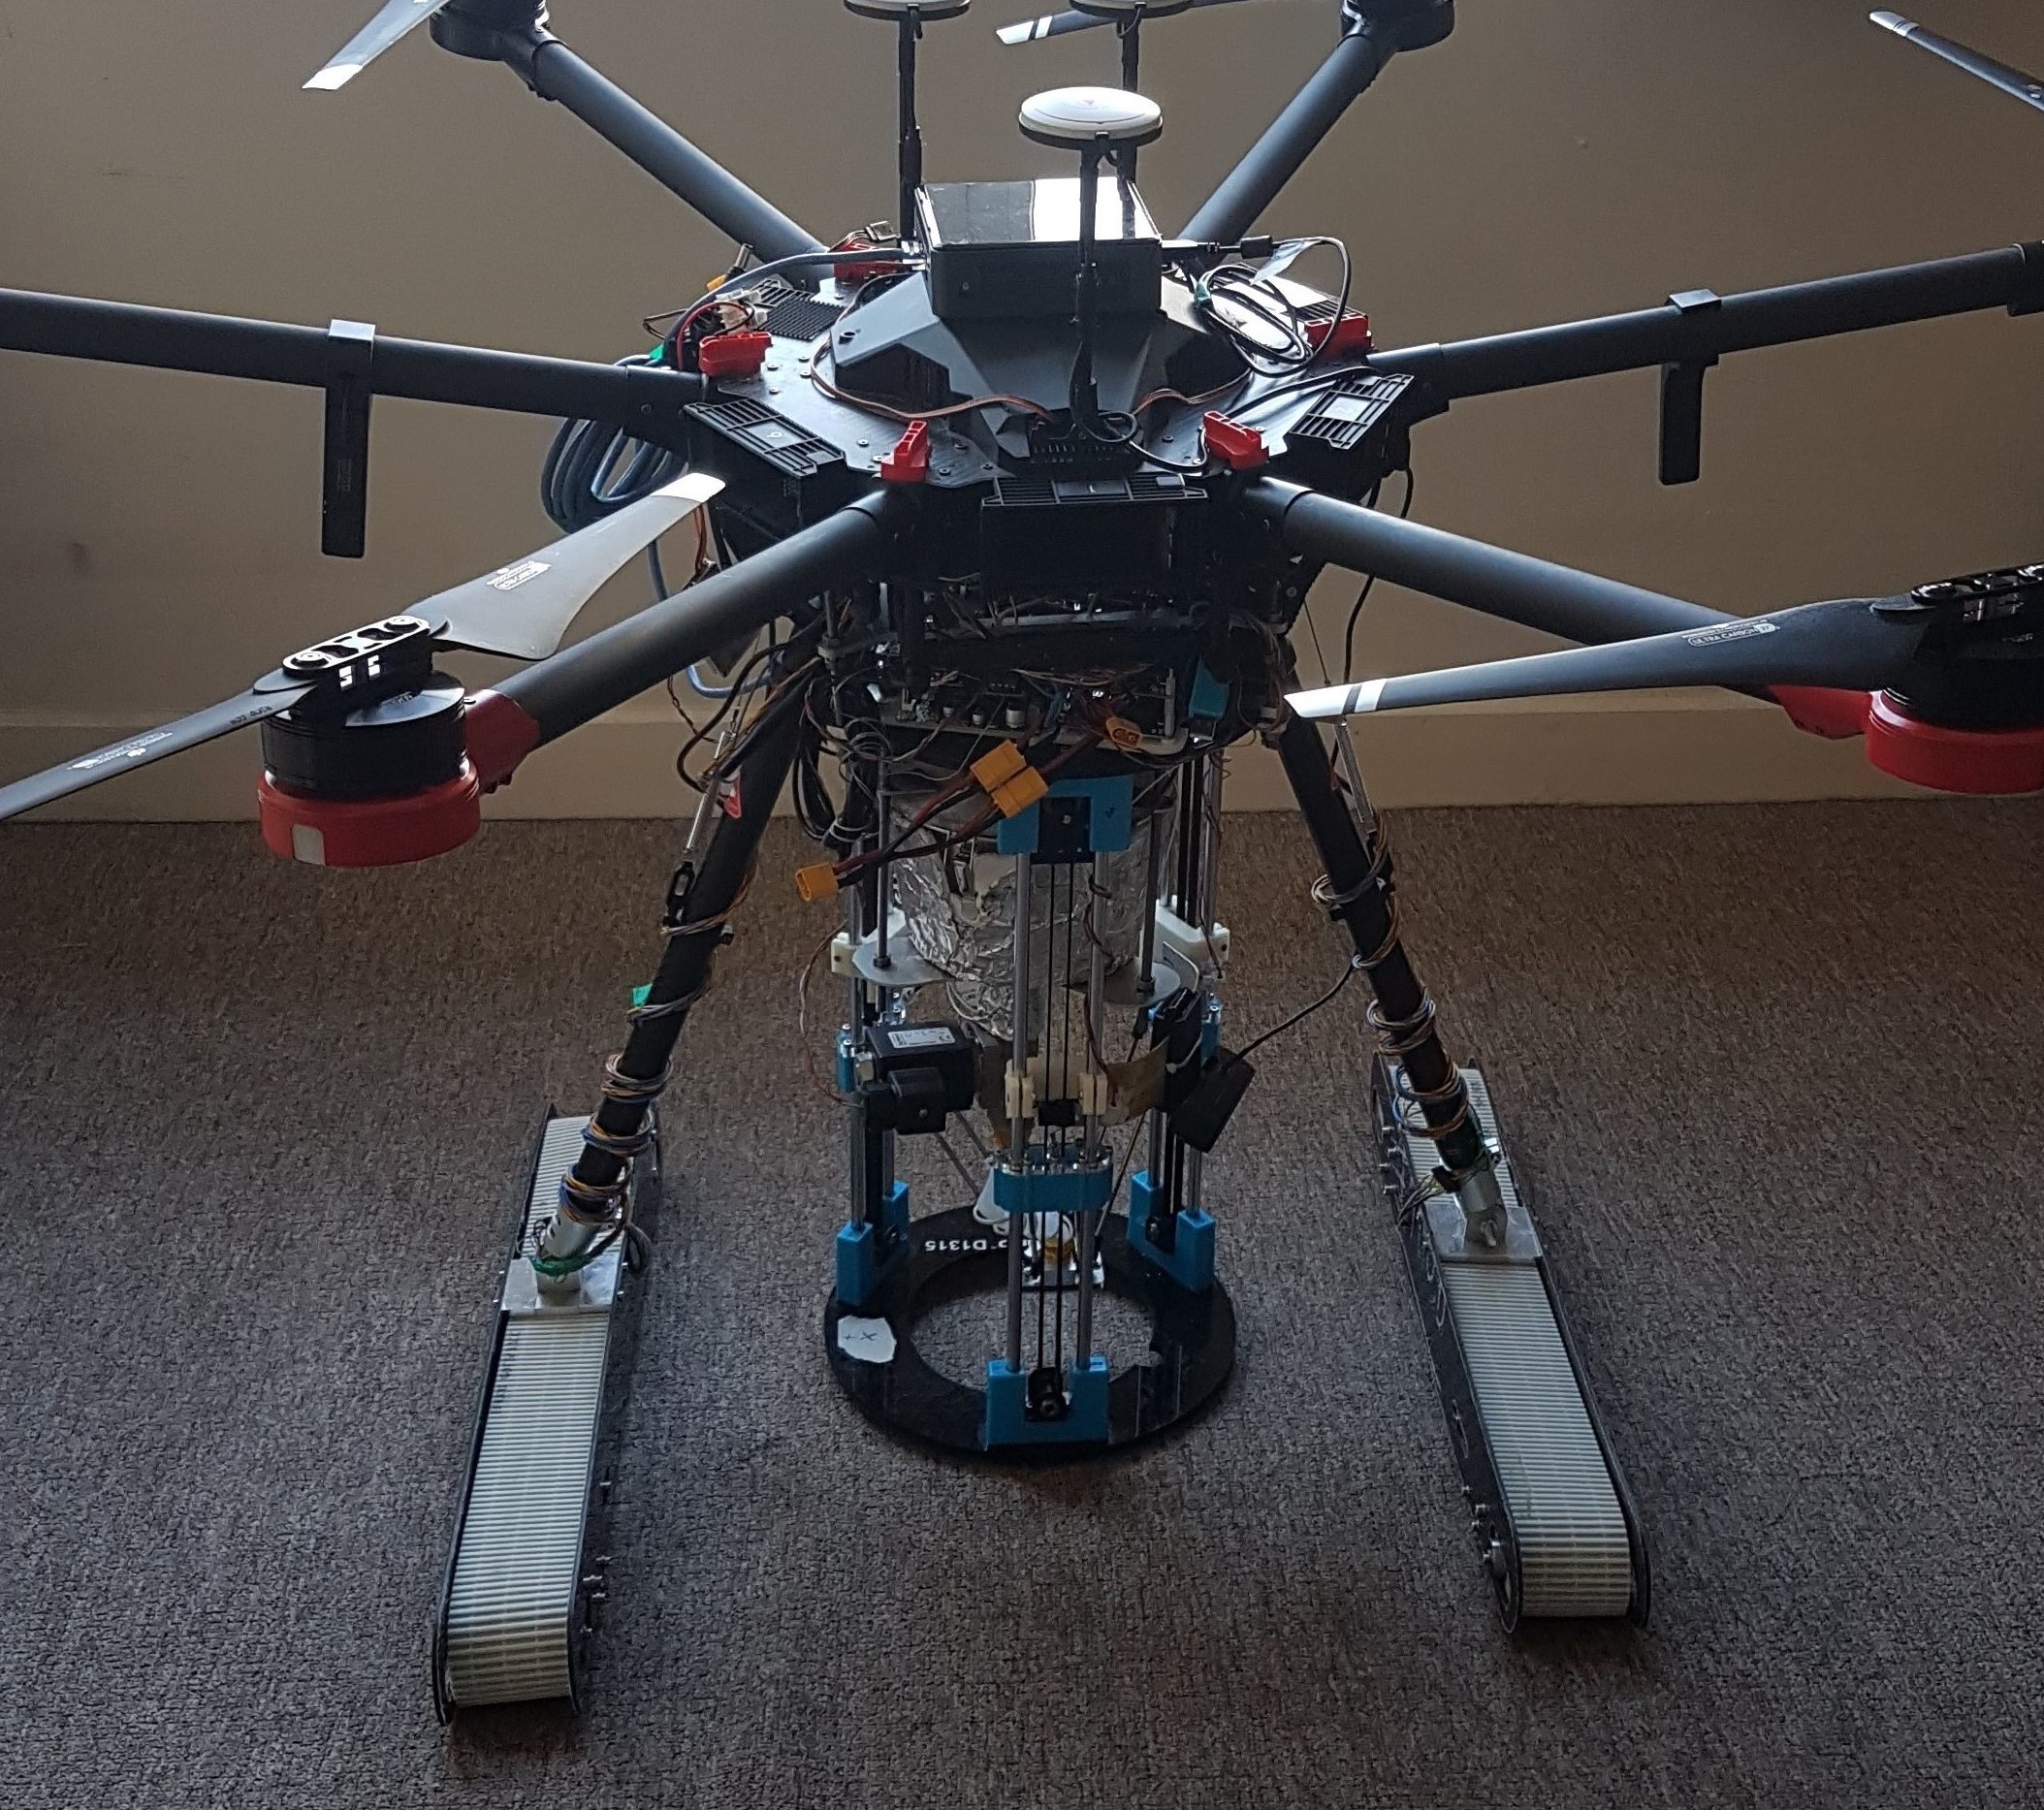 Flying asphalt 3D printer gets eyes and legs for autonomous road crack detection and repair.